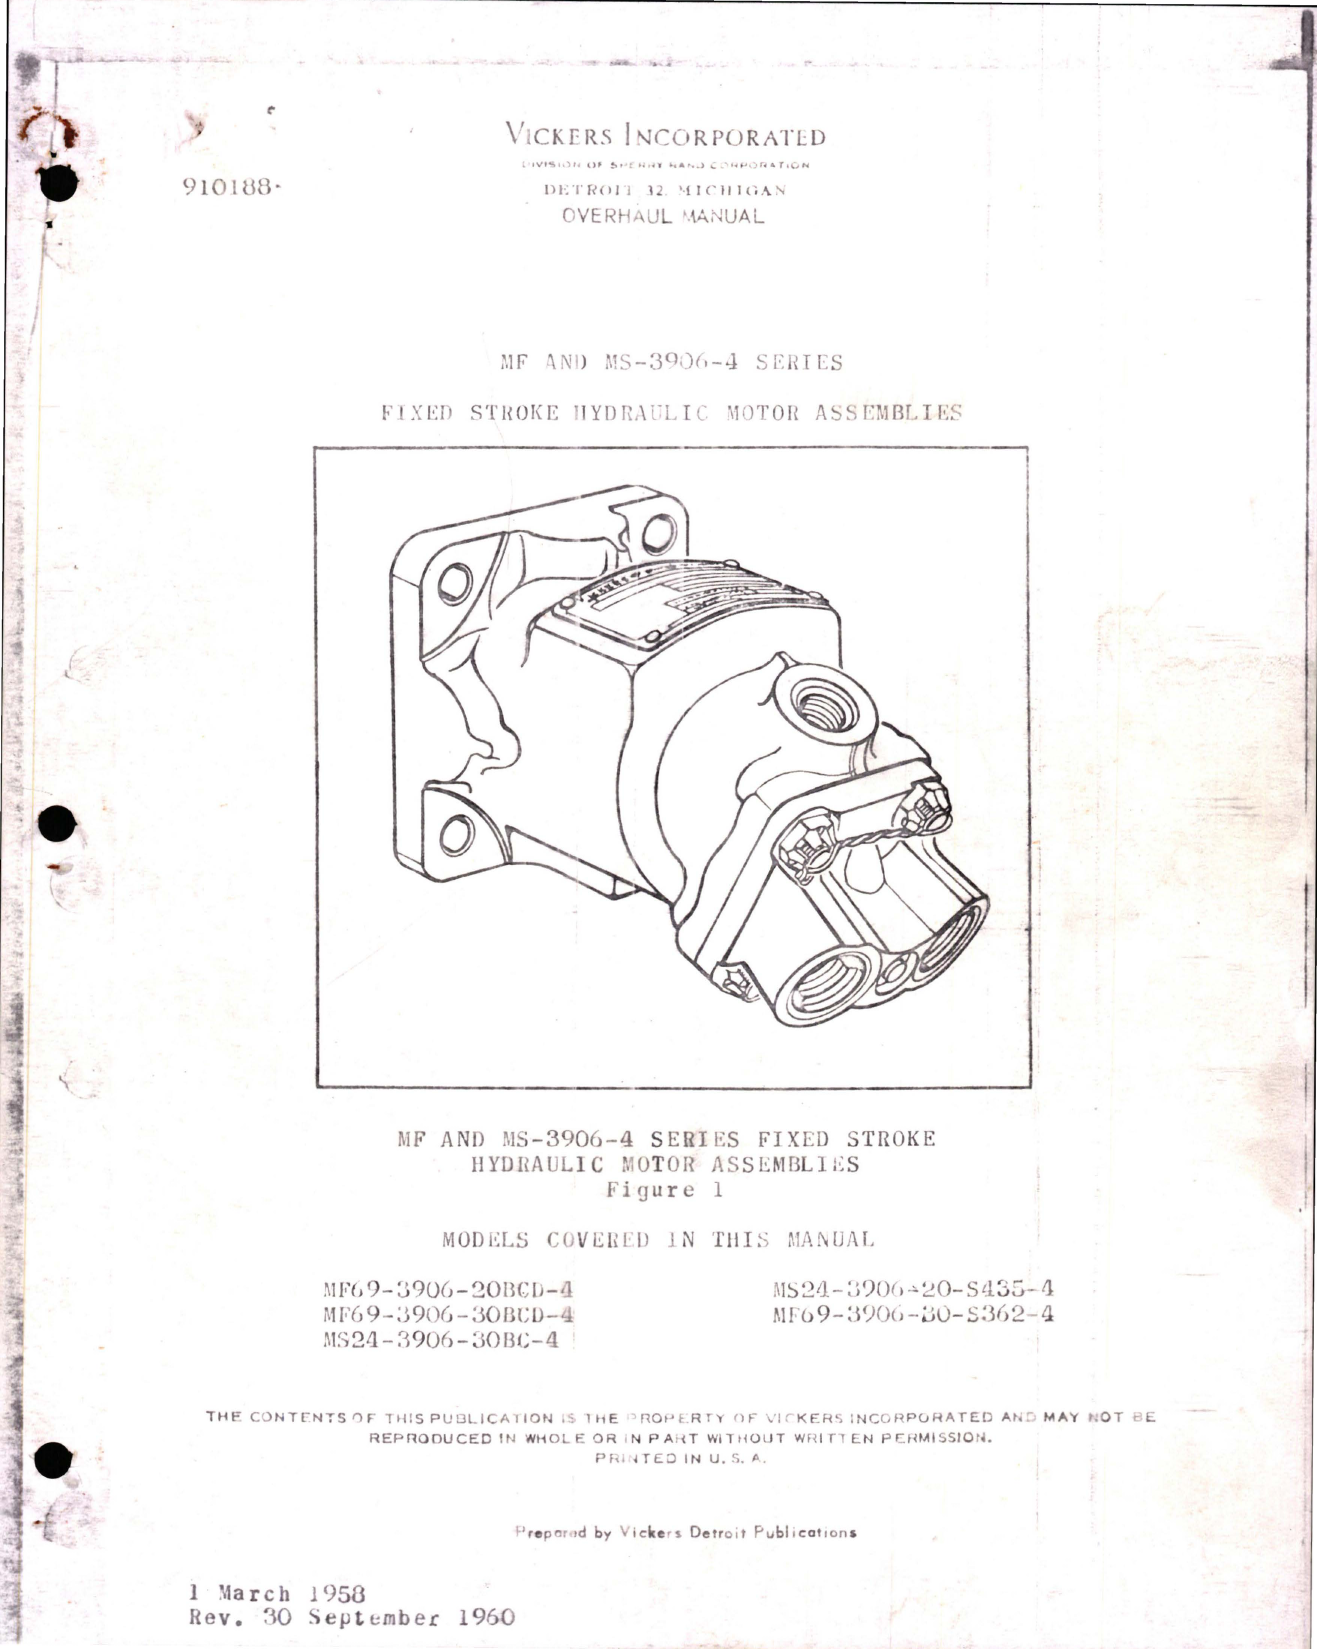 Sample page 1 from AirCorps Library document: Overhaul Manual for Fixed Stroke Hydraulic Motor Assemblies - MF-3906 and MS-3906 Series